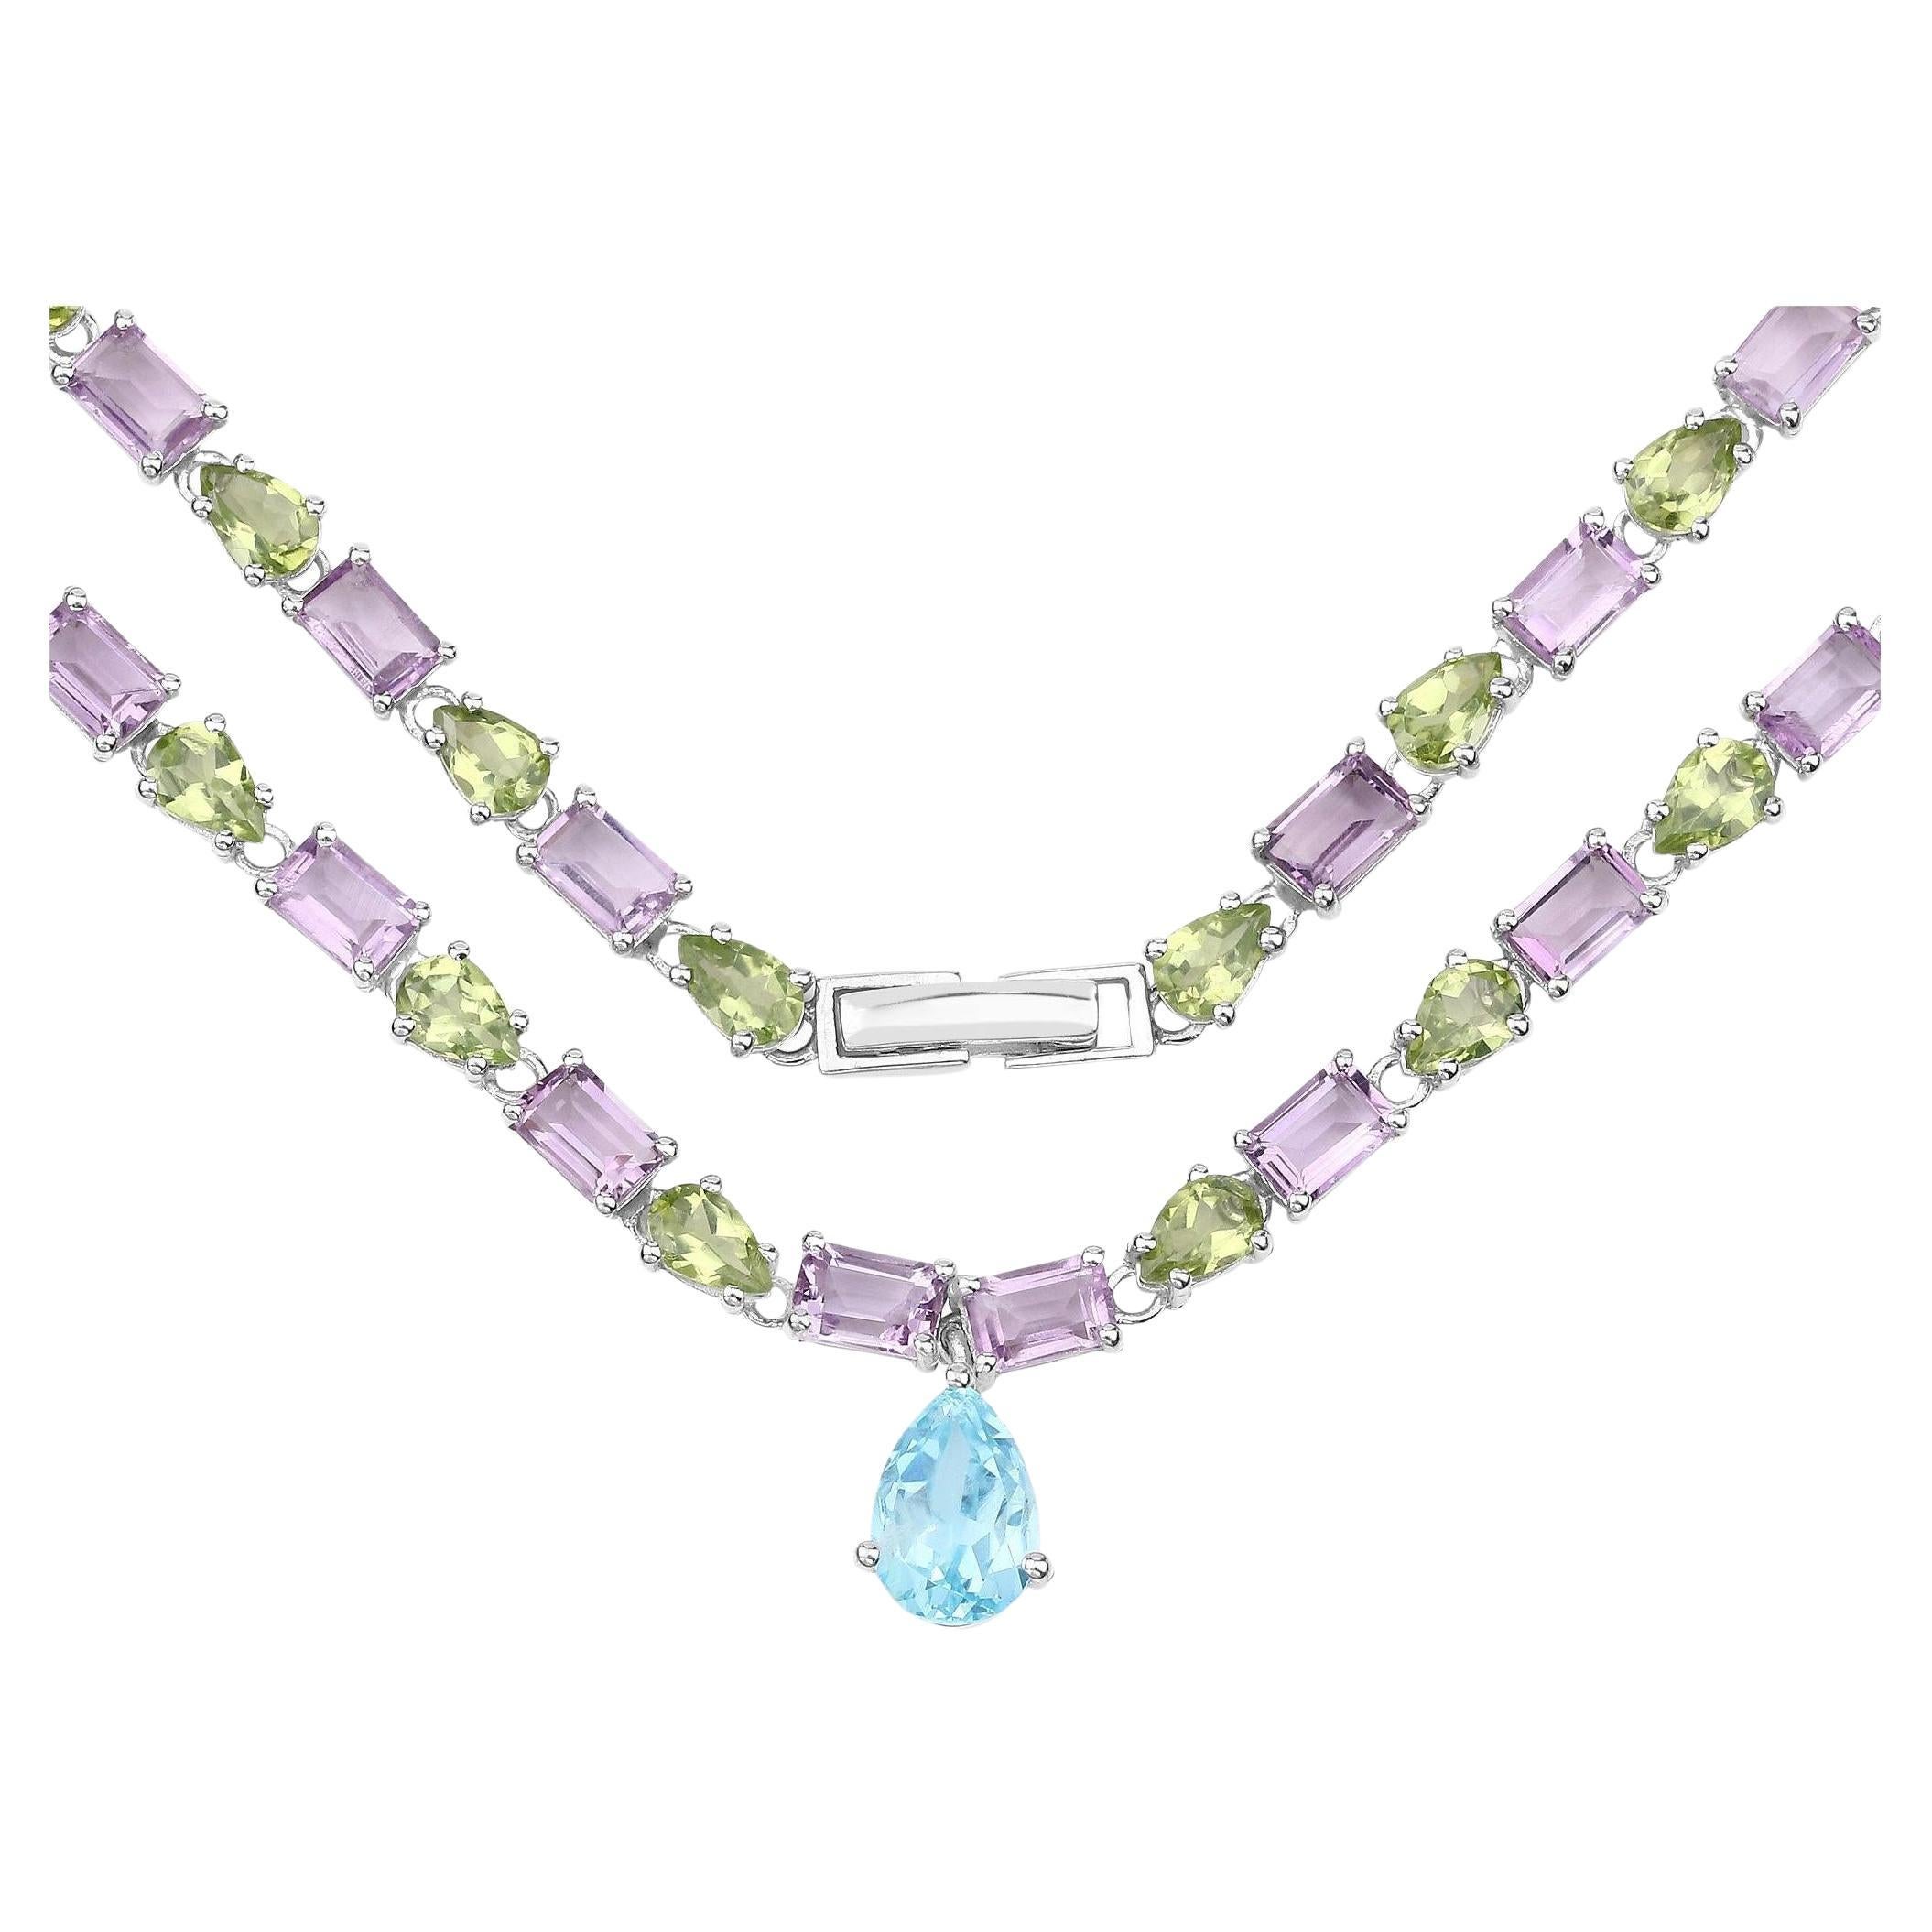 Natural Blue Topaz Amethyst and Peridot Eternity Necklace 32 Carats Silver